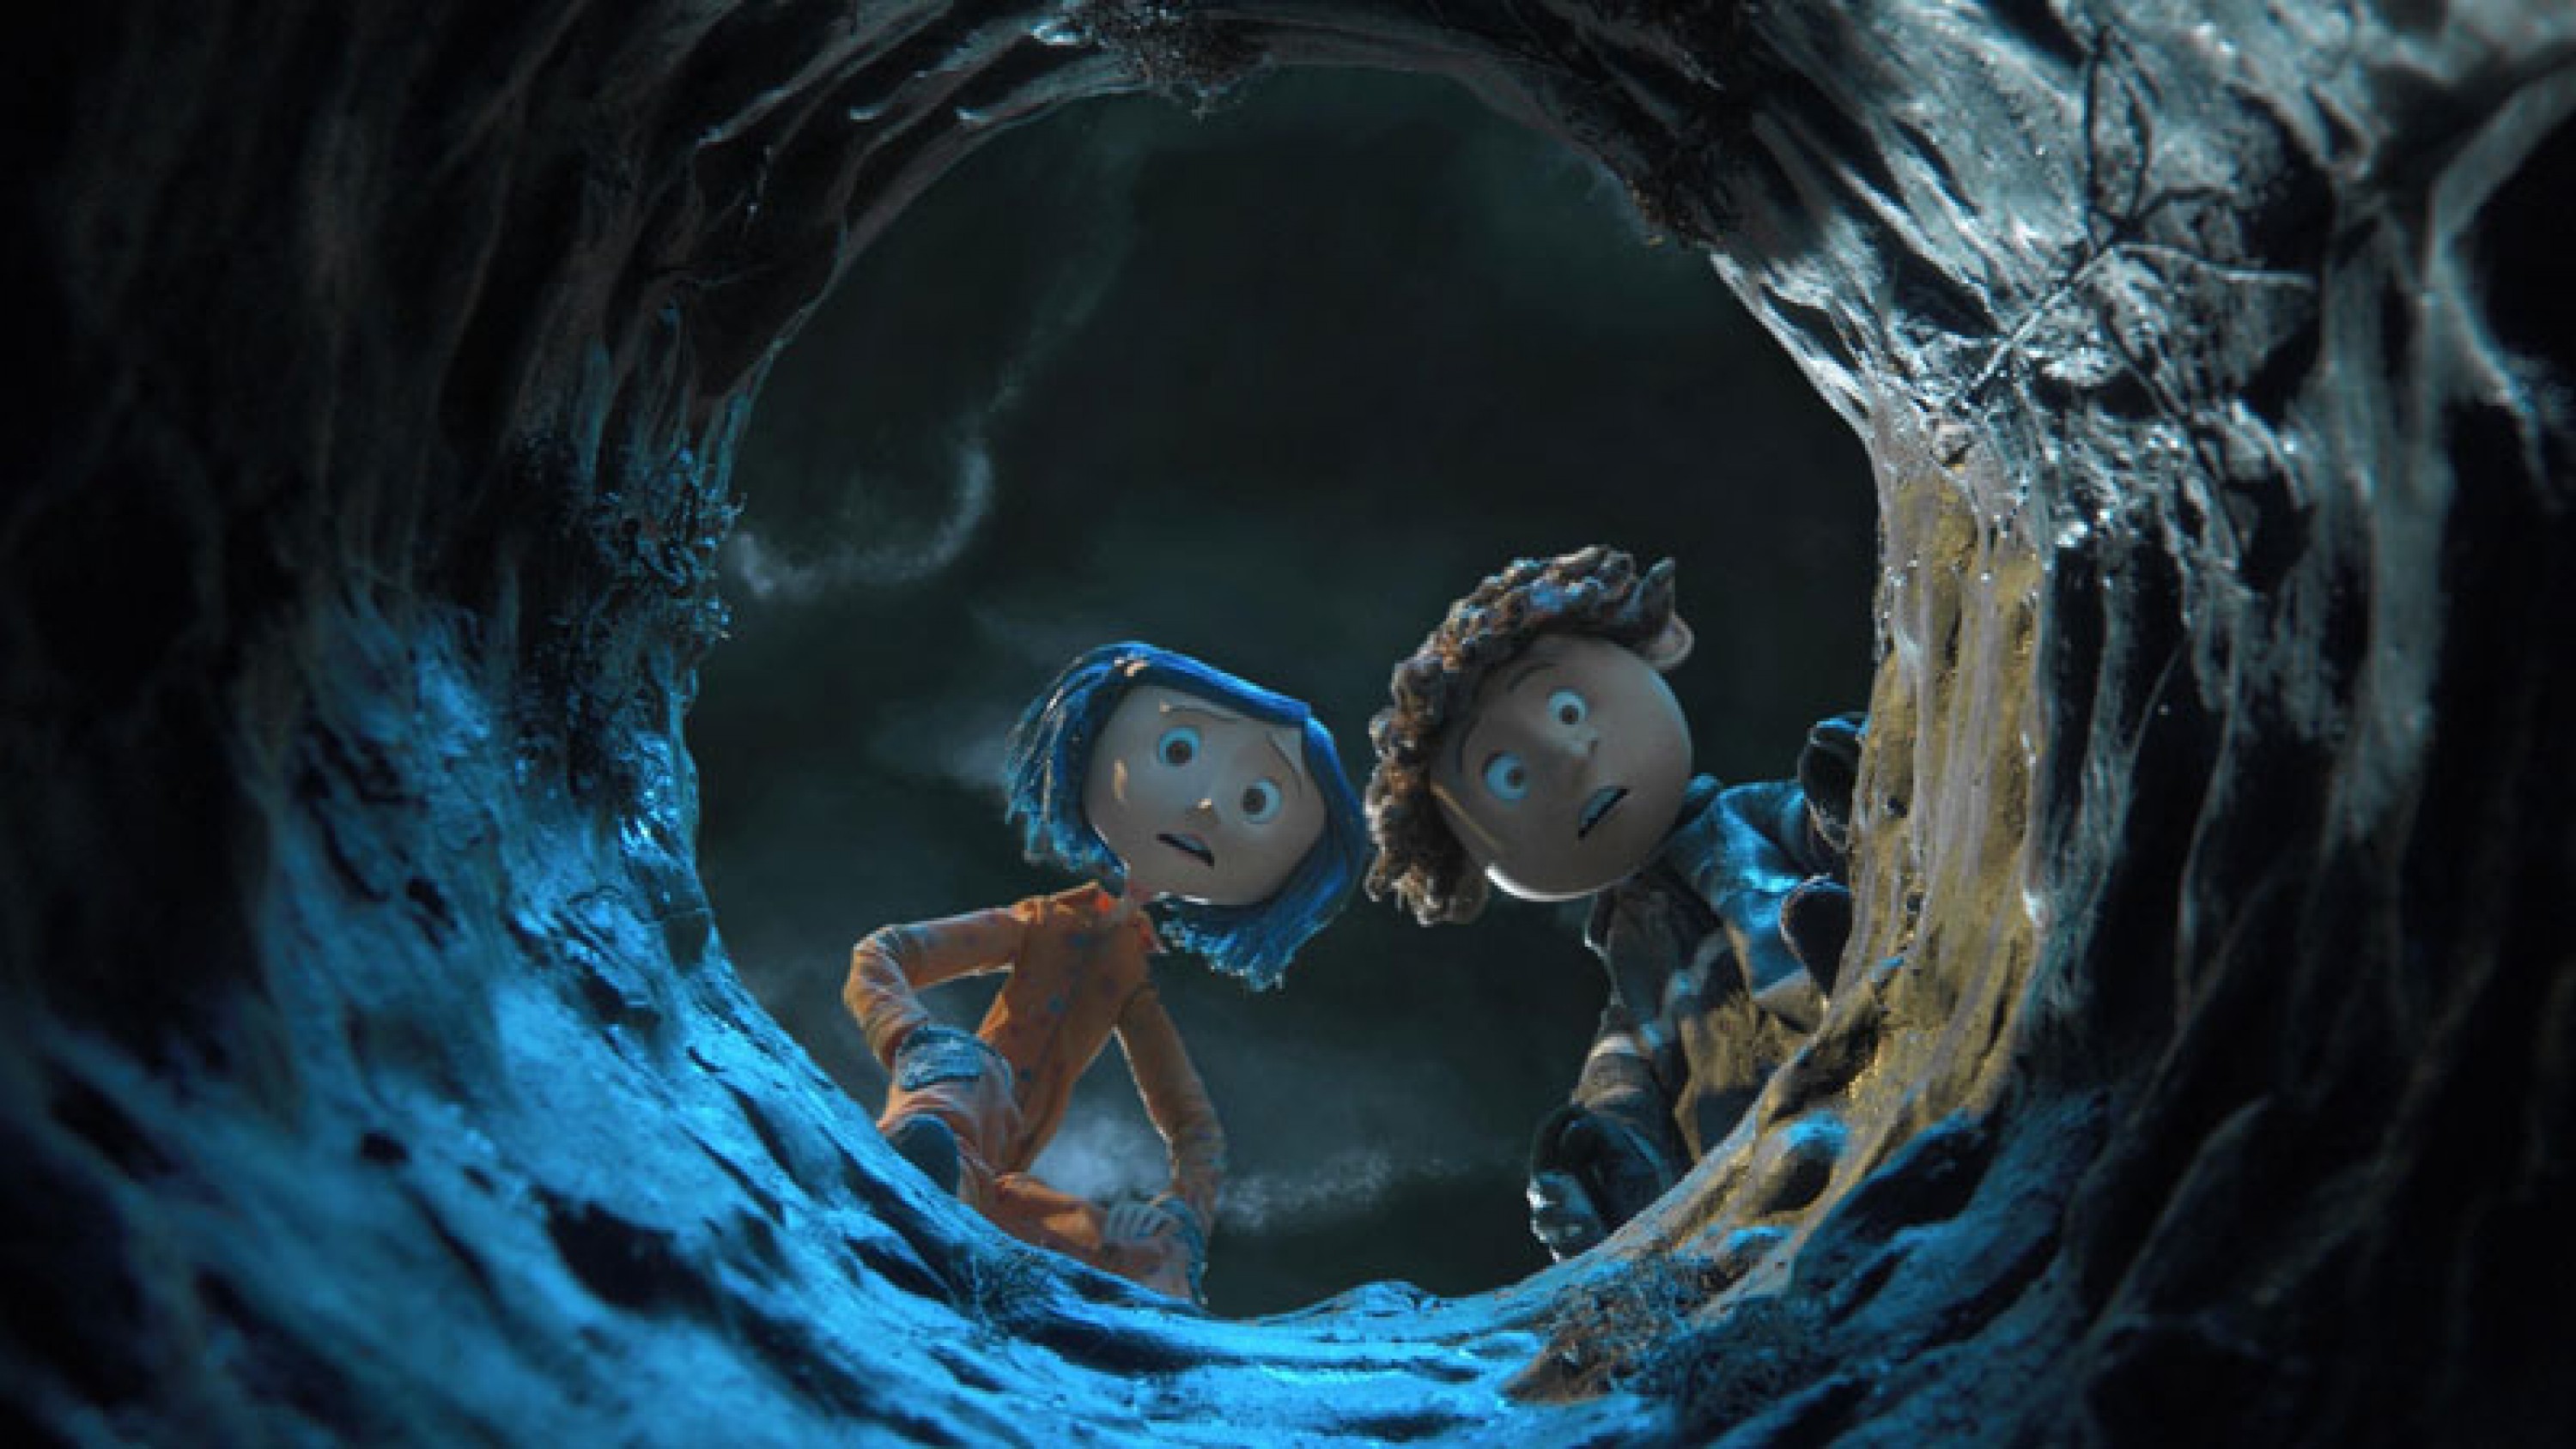 https://www.intofilm.org/intofilm-production/6811/scaledcropped/3000x1688/resources/6811/coraline-ep2-focus-features.jpg